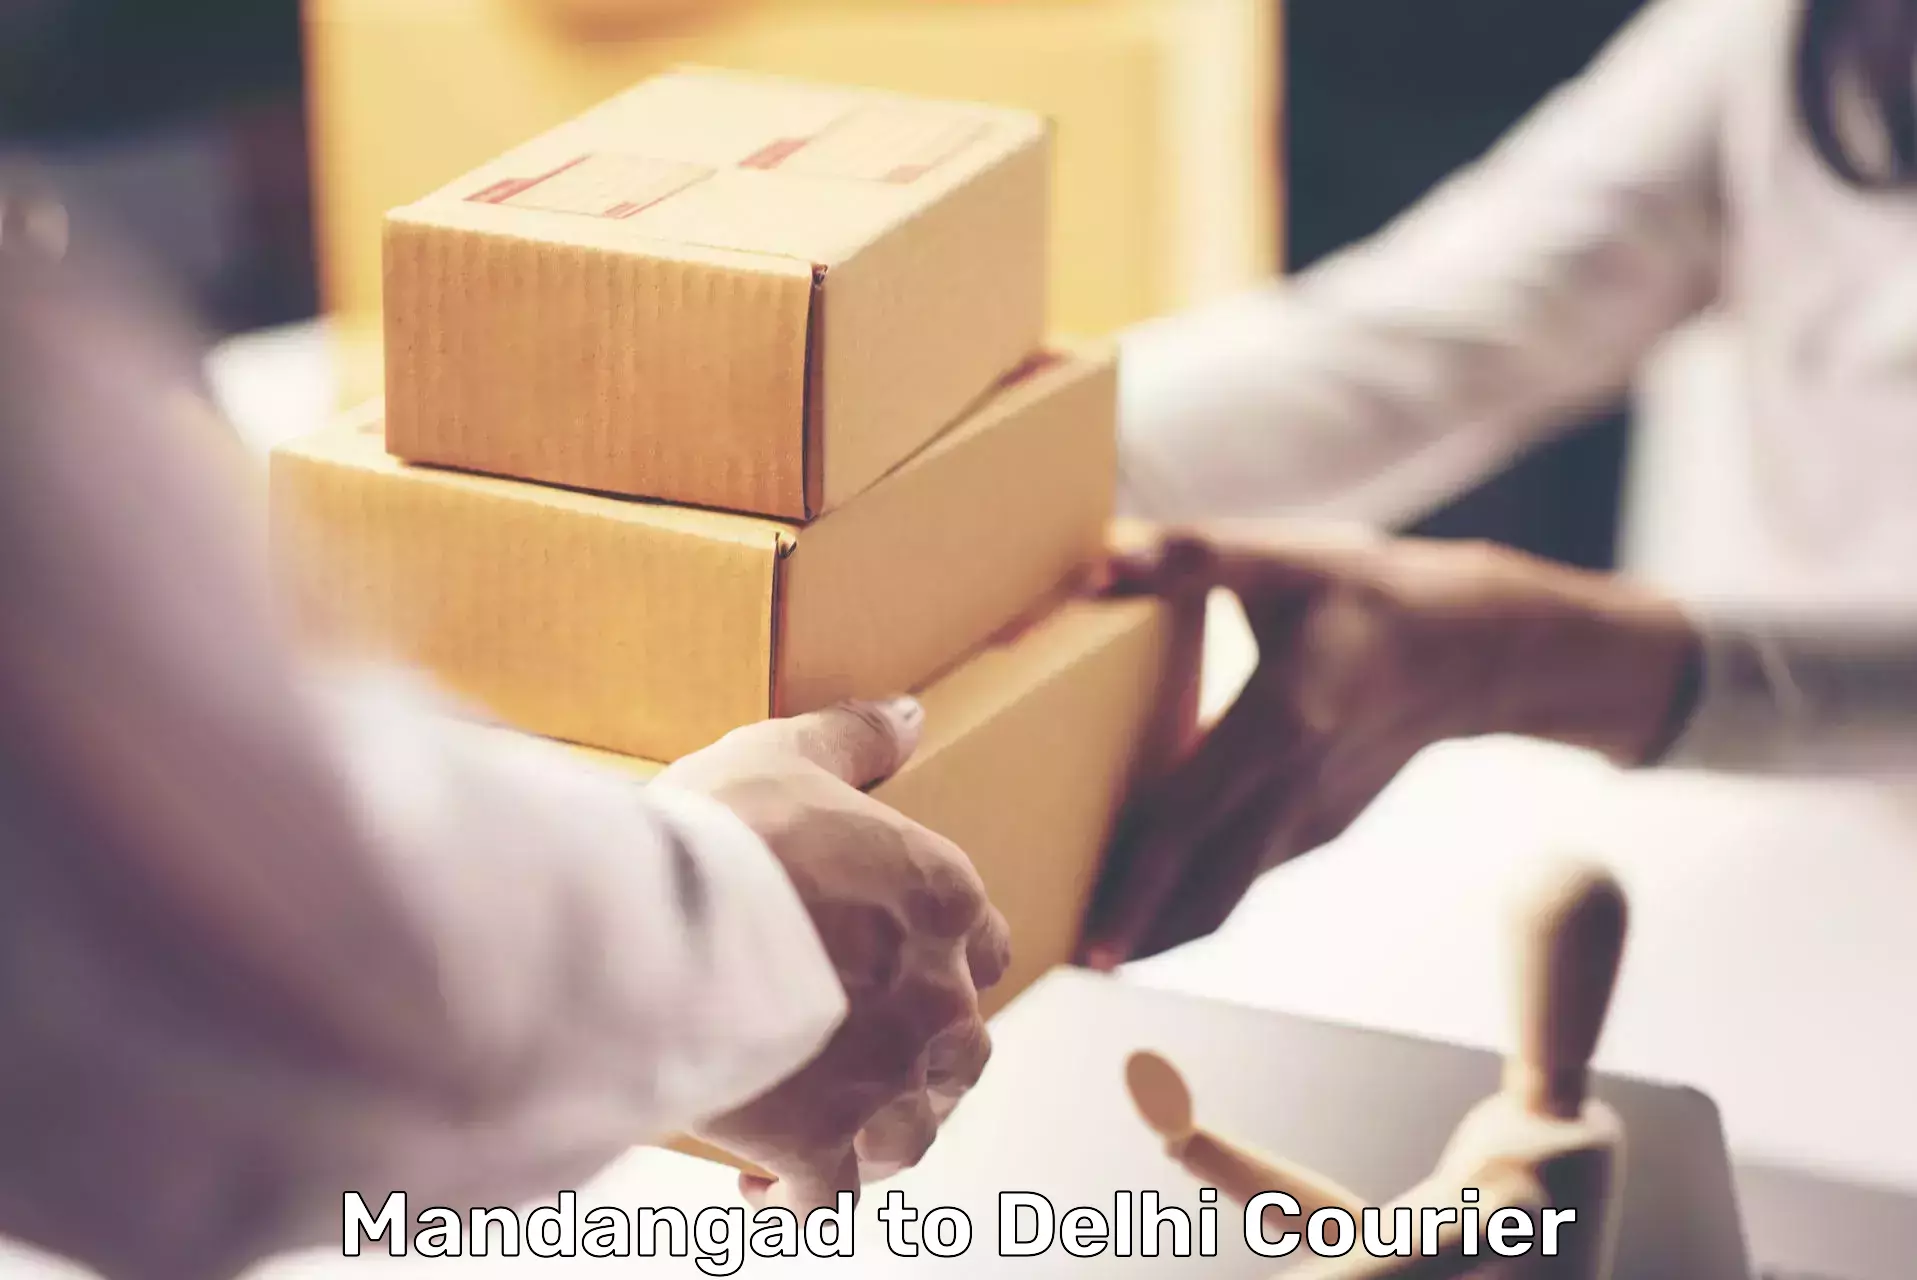 Personalized courier experiences Mandangad to Lodhi Road